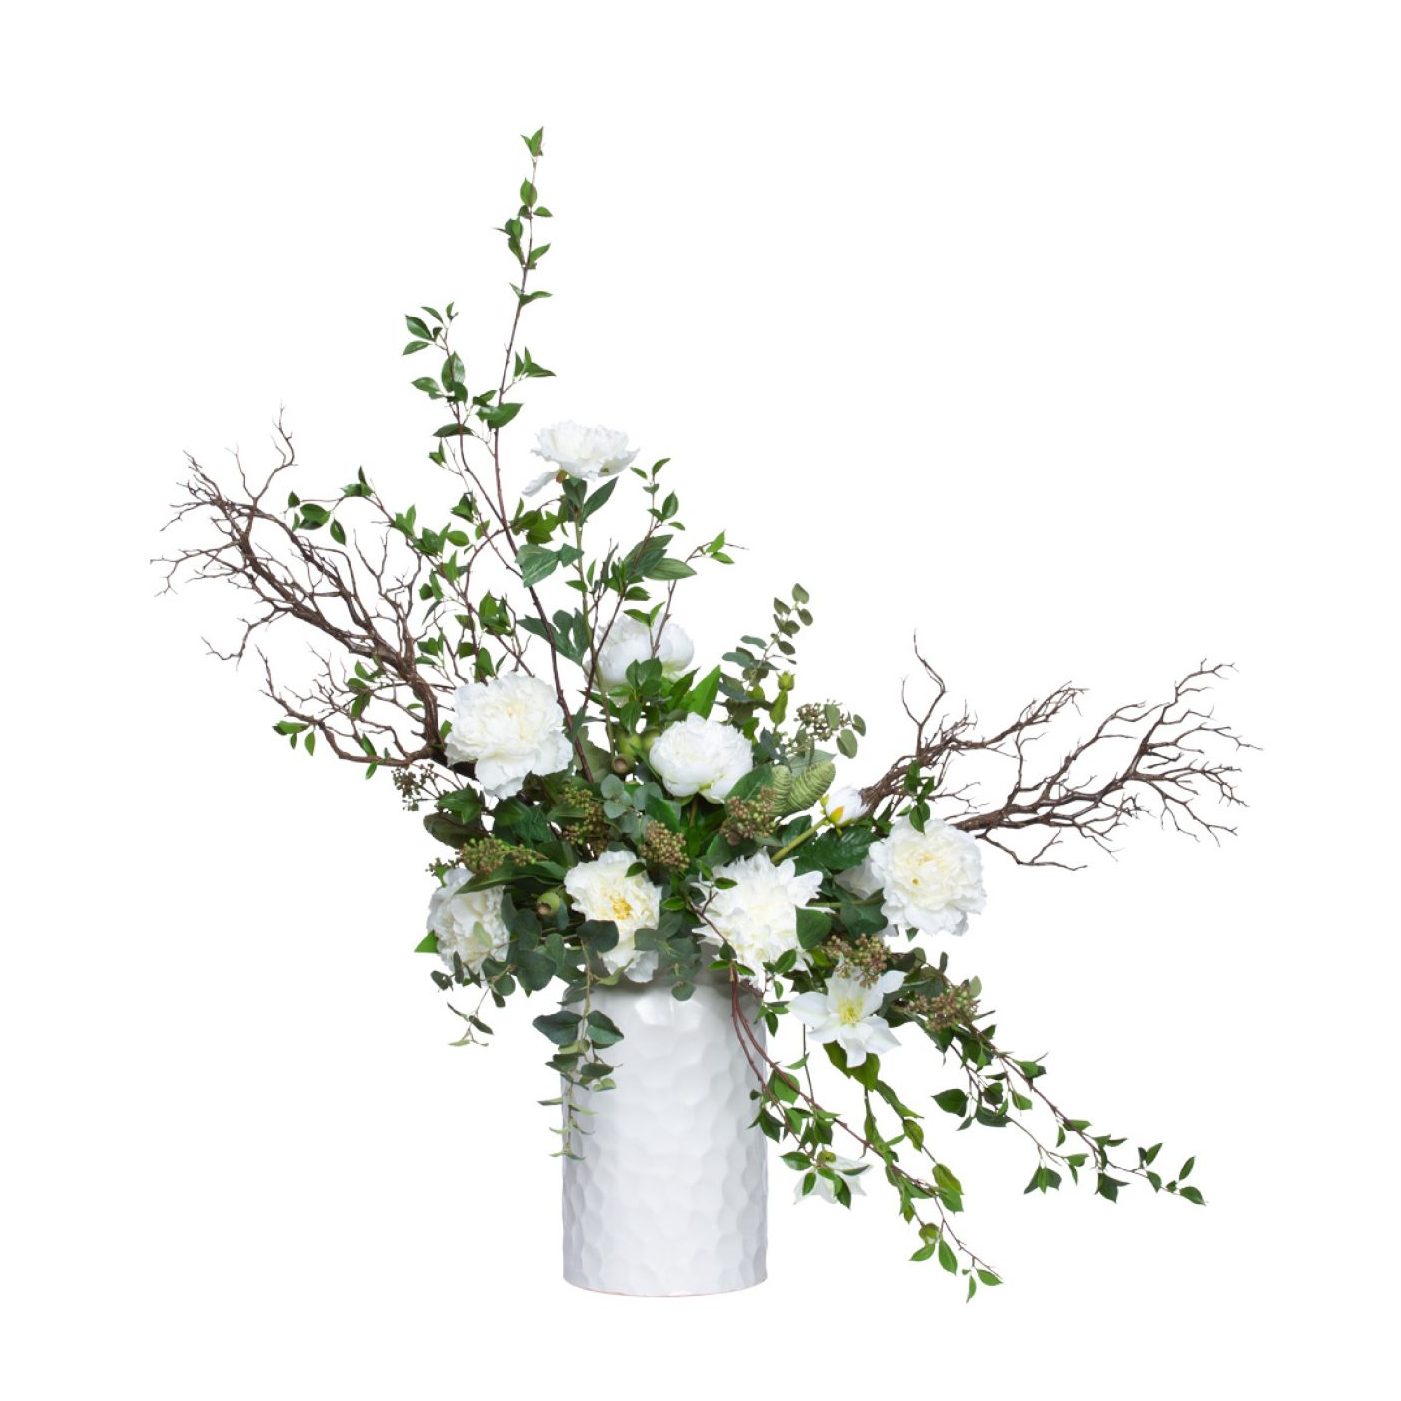 Assorted Flowers/Greenery In Tall White Pot - Hedi's Furniture